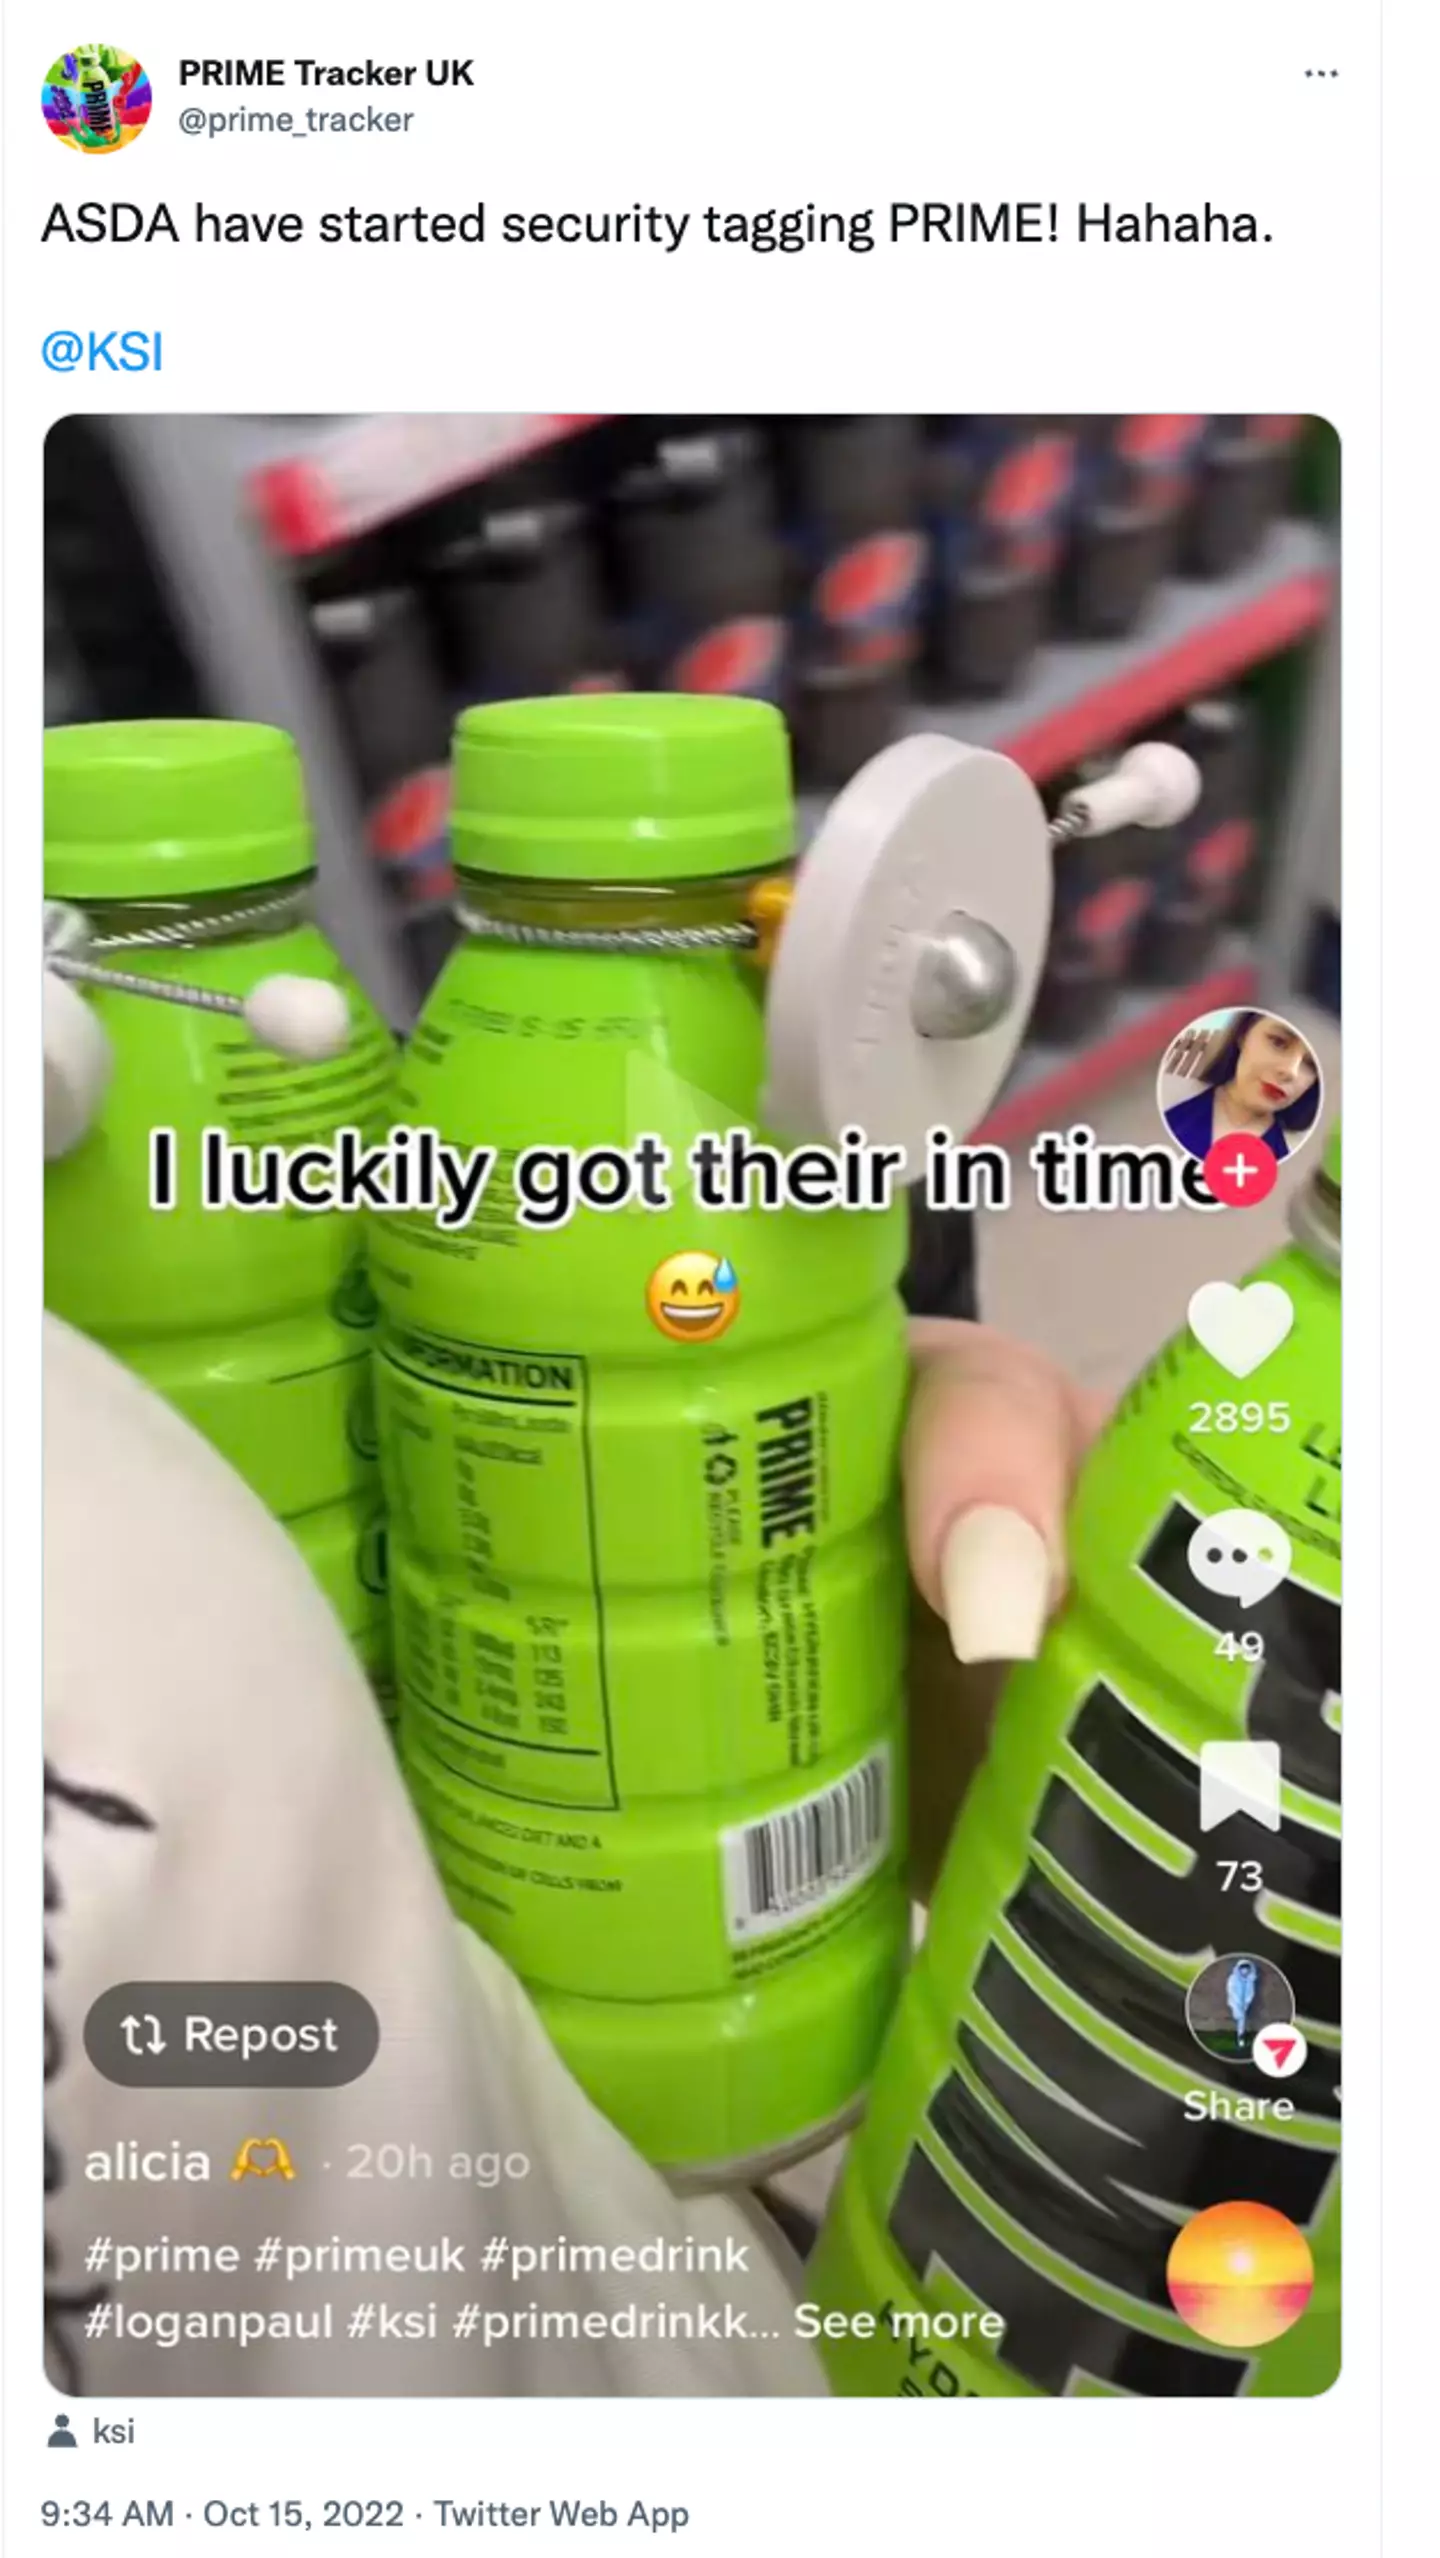 The energy drink has become somewhat of a viral craze, resulting in some supermarkets putting security tags on the bottles.